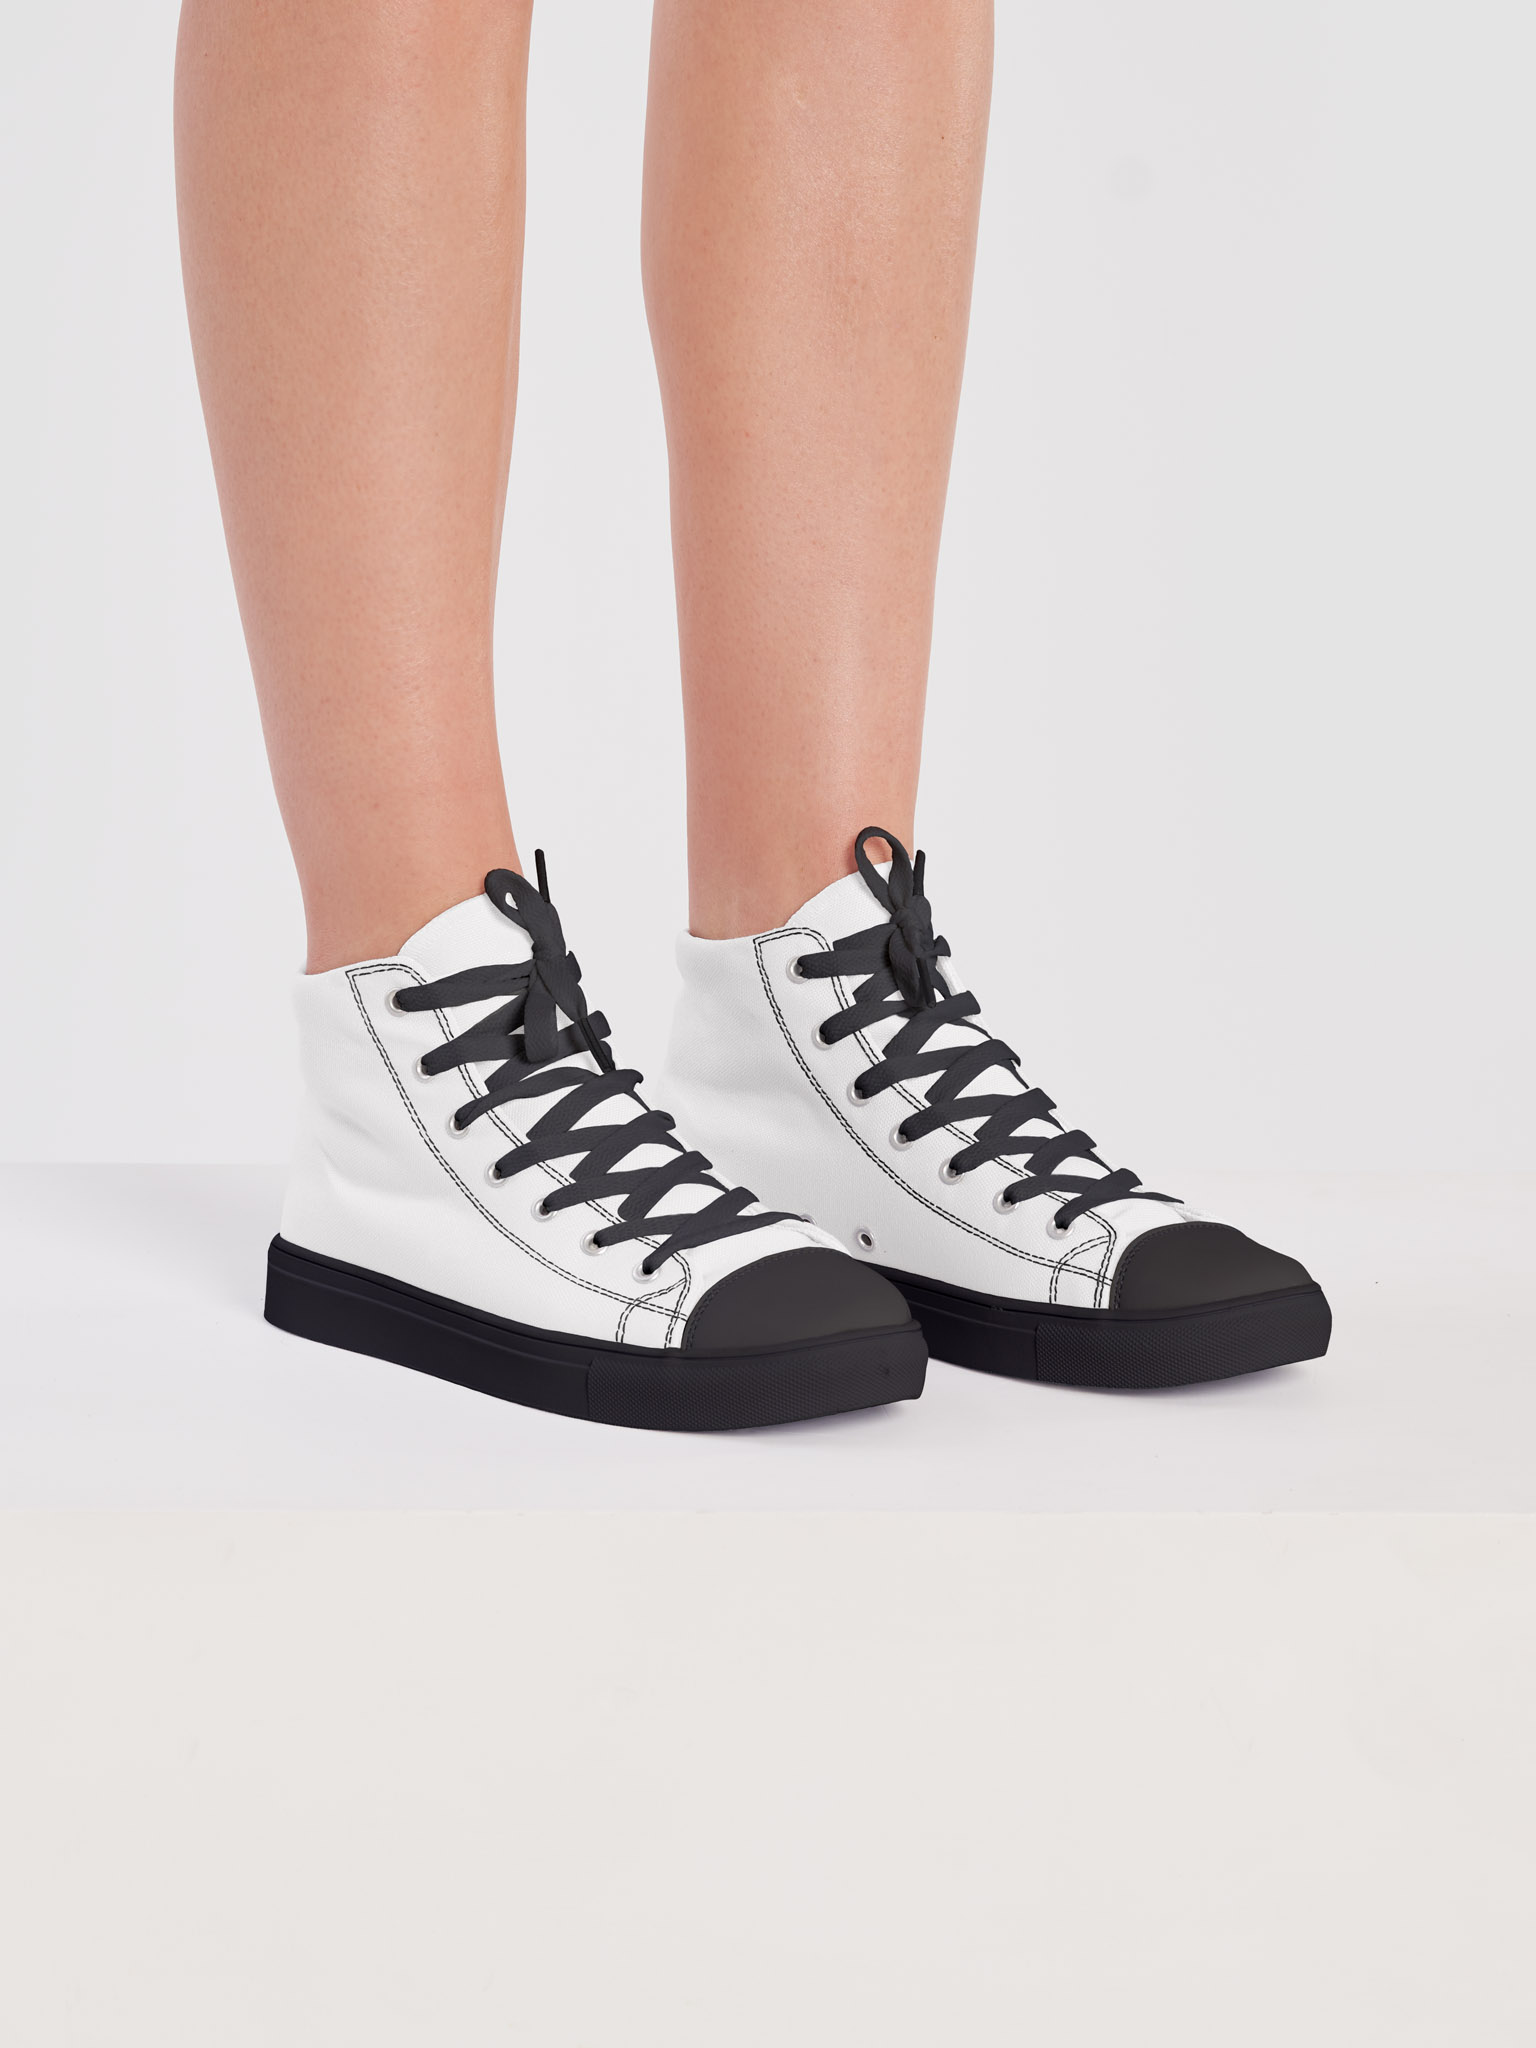 Share 188+ womens black canvas sneakers